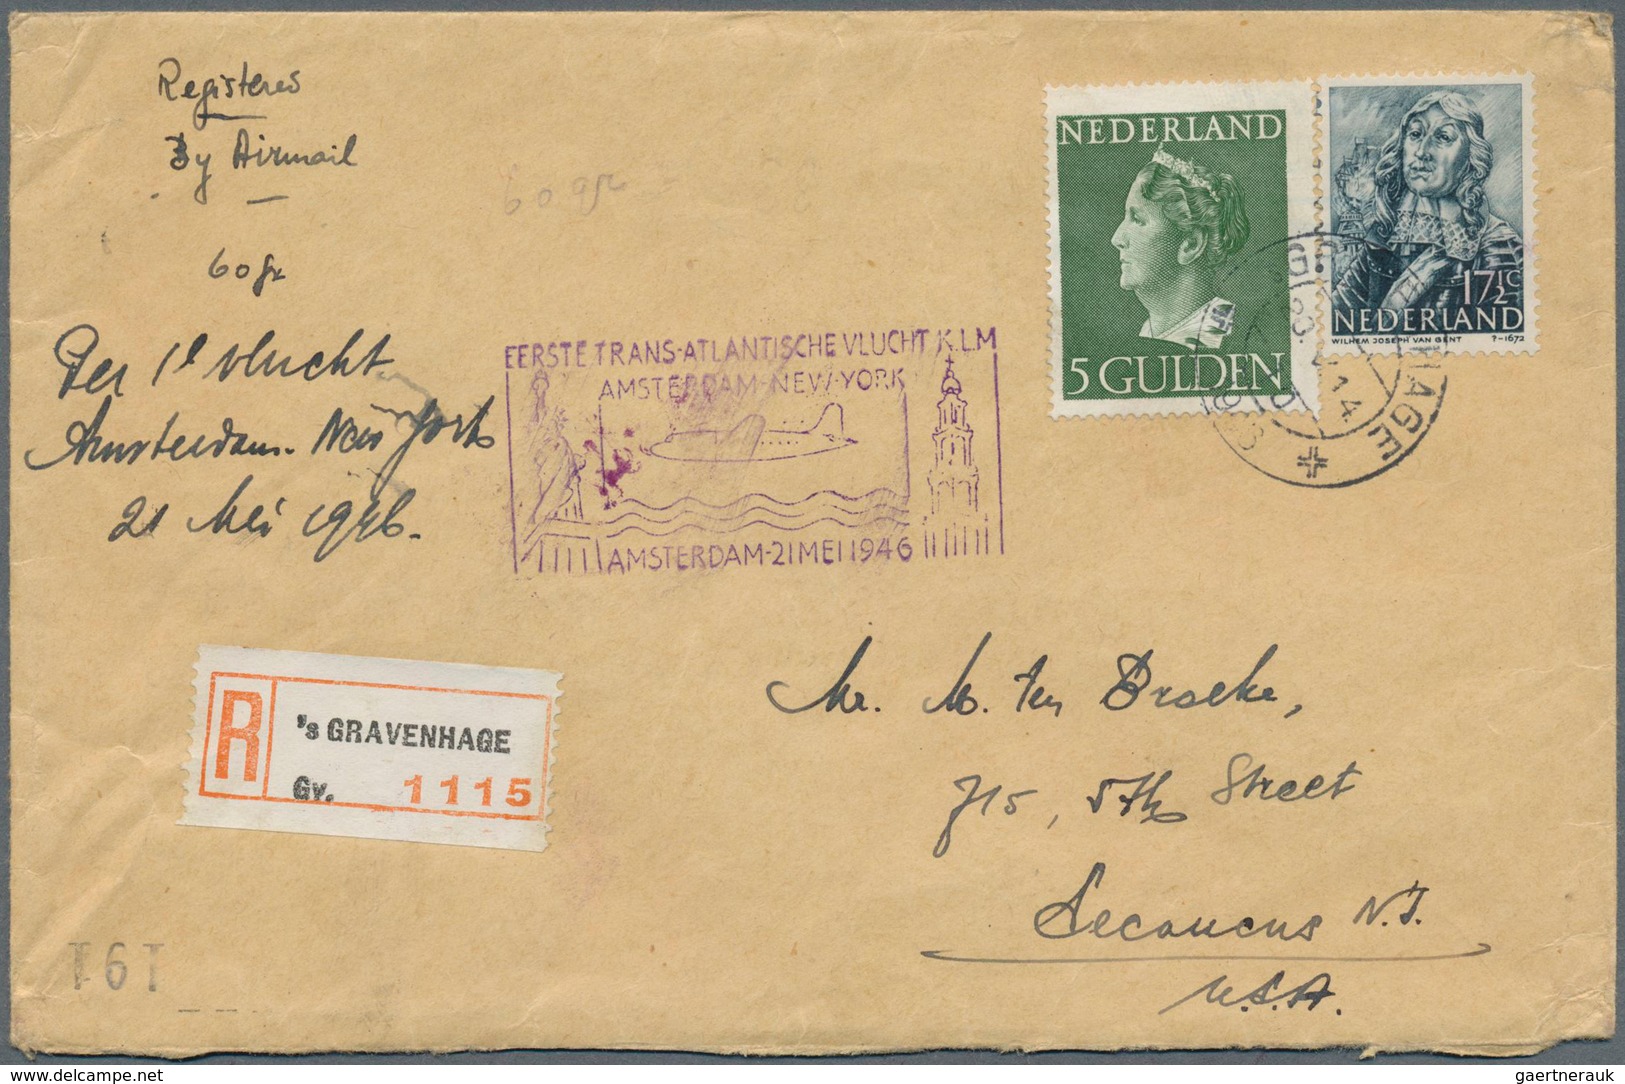 27463 Niederlande: 1929/1949, comprehensive collection with ca.200 covers, comprising many better airmail